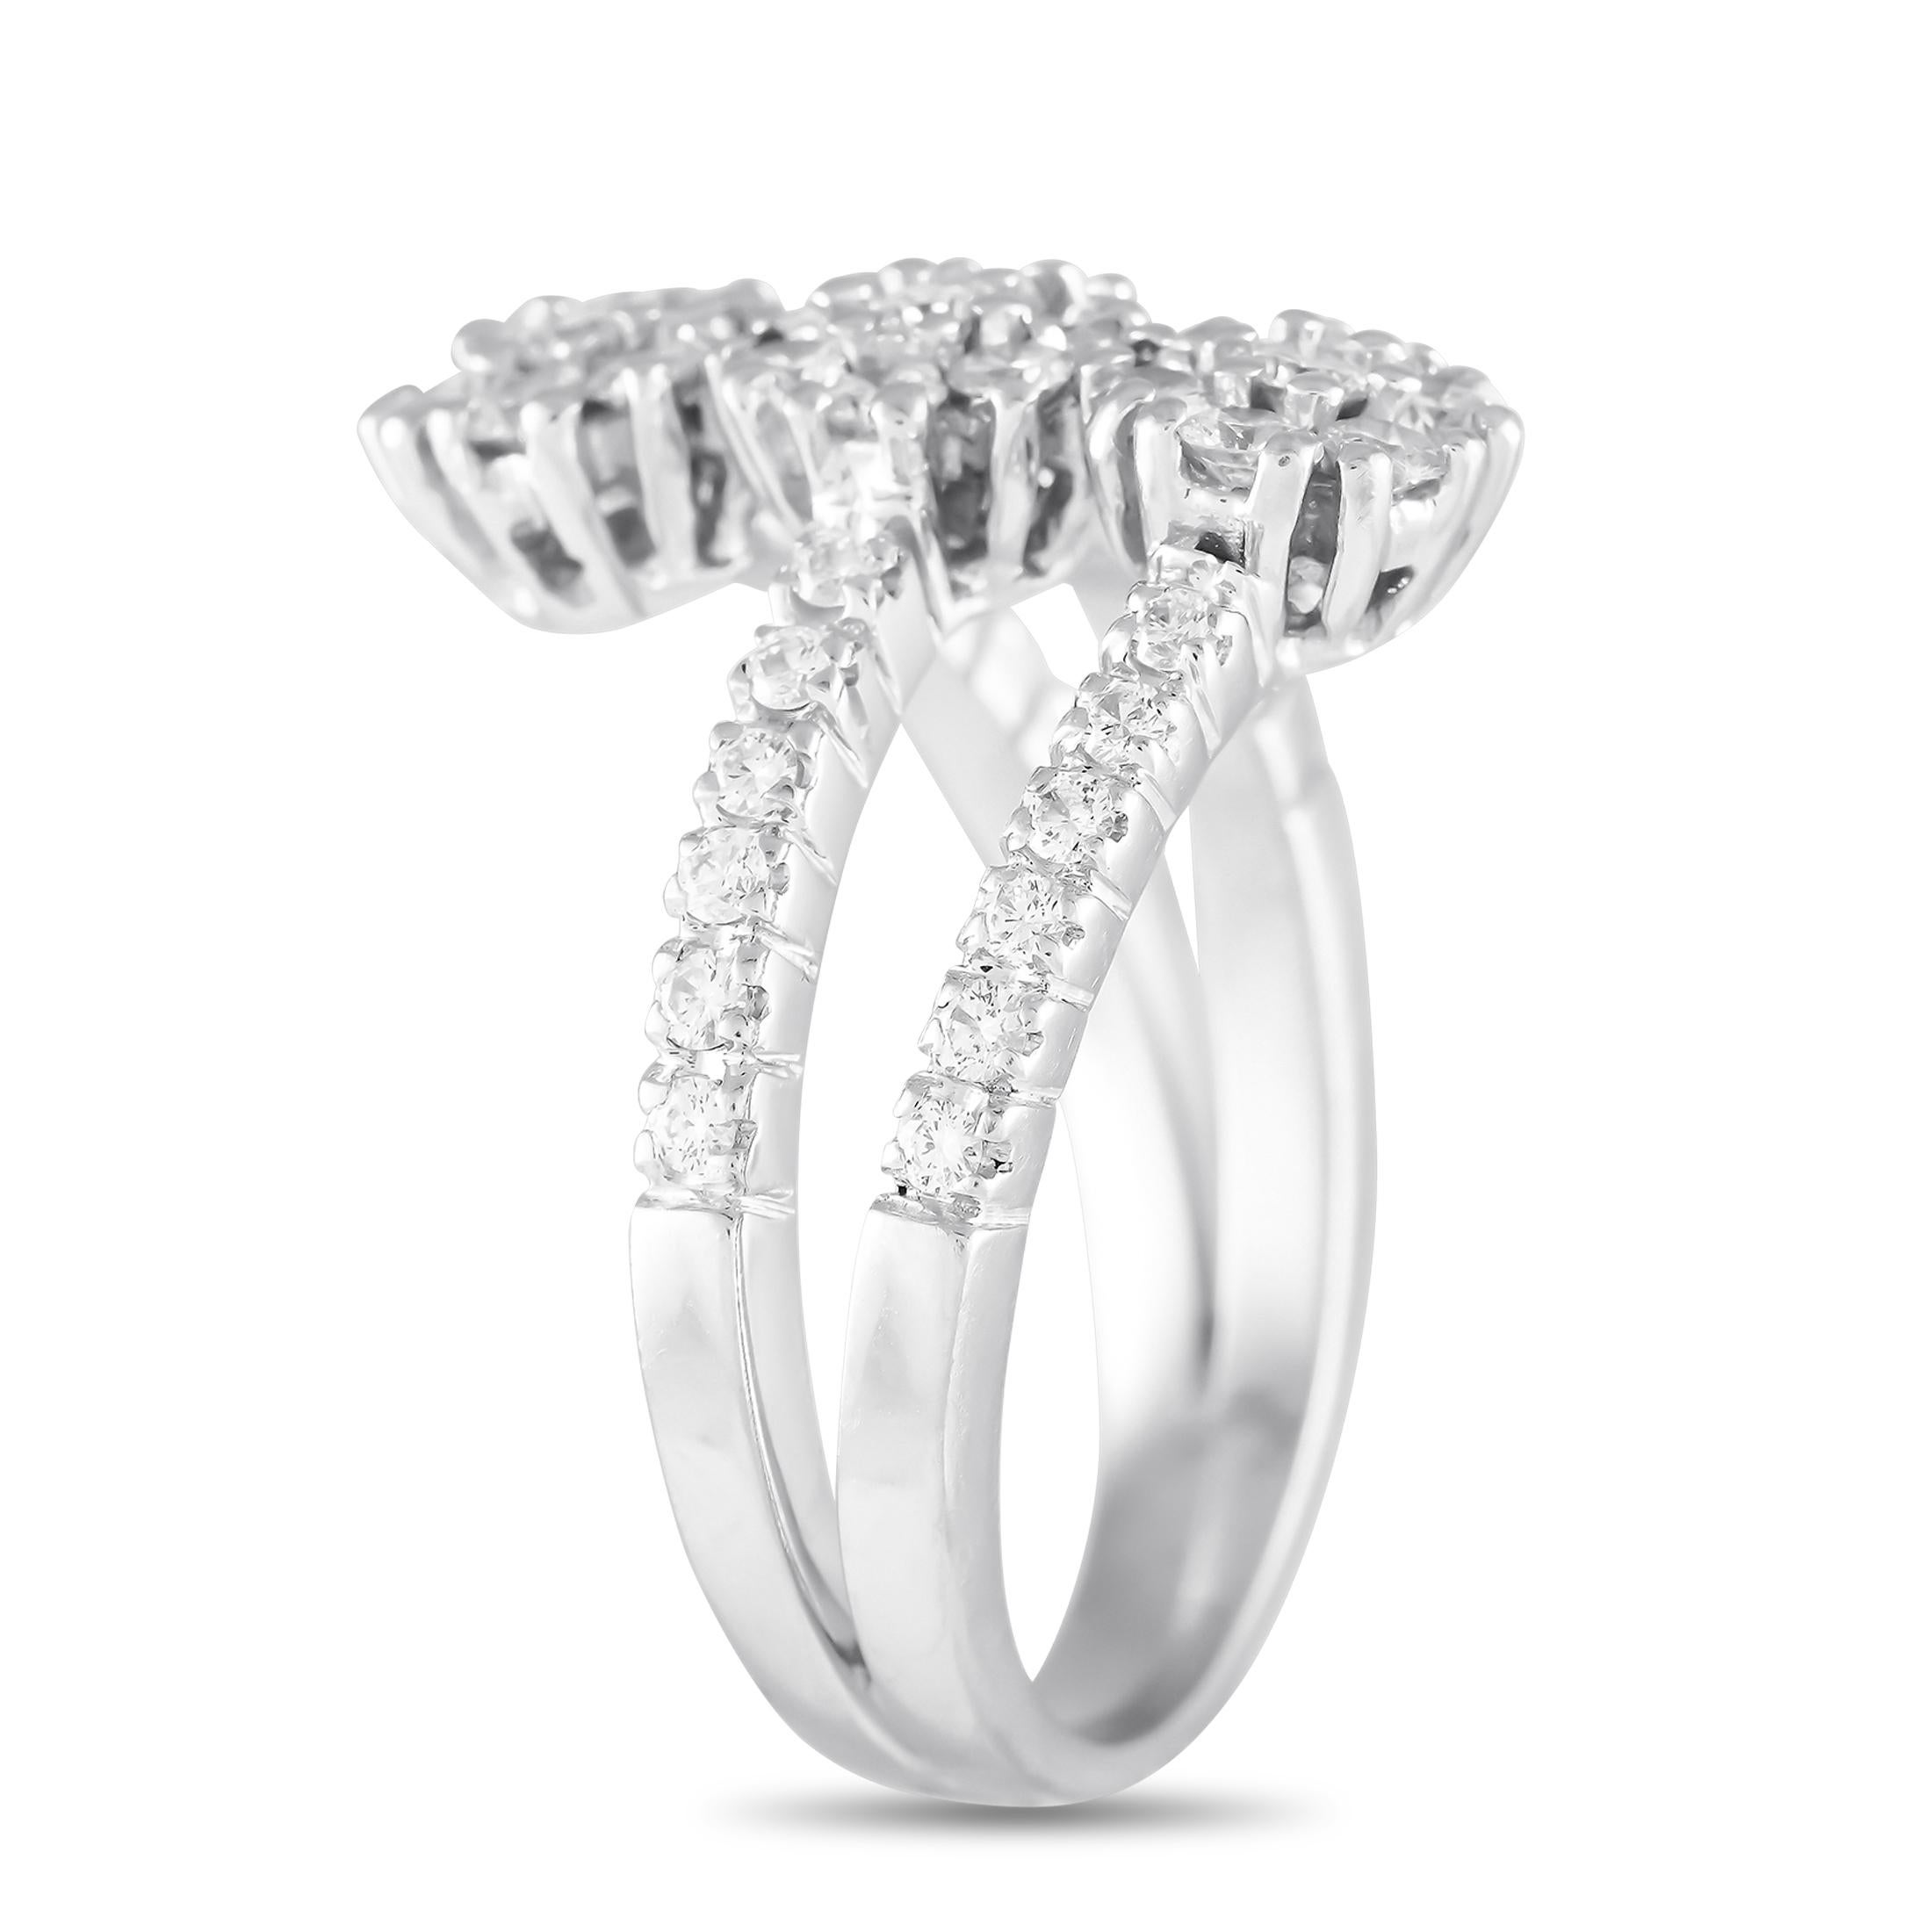 Love the stacked look but prefer to wear just one ring? Then this elegant and unique piece is for you. This 18K white gold ring has a split shank that creates a coiled, multi-ring silhouette. The ring is composed of a perfect circle middle band with